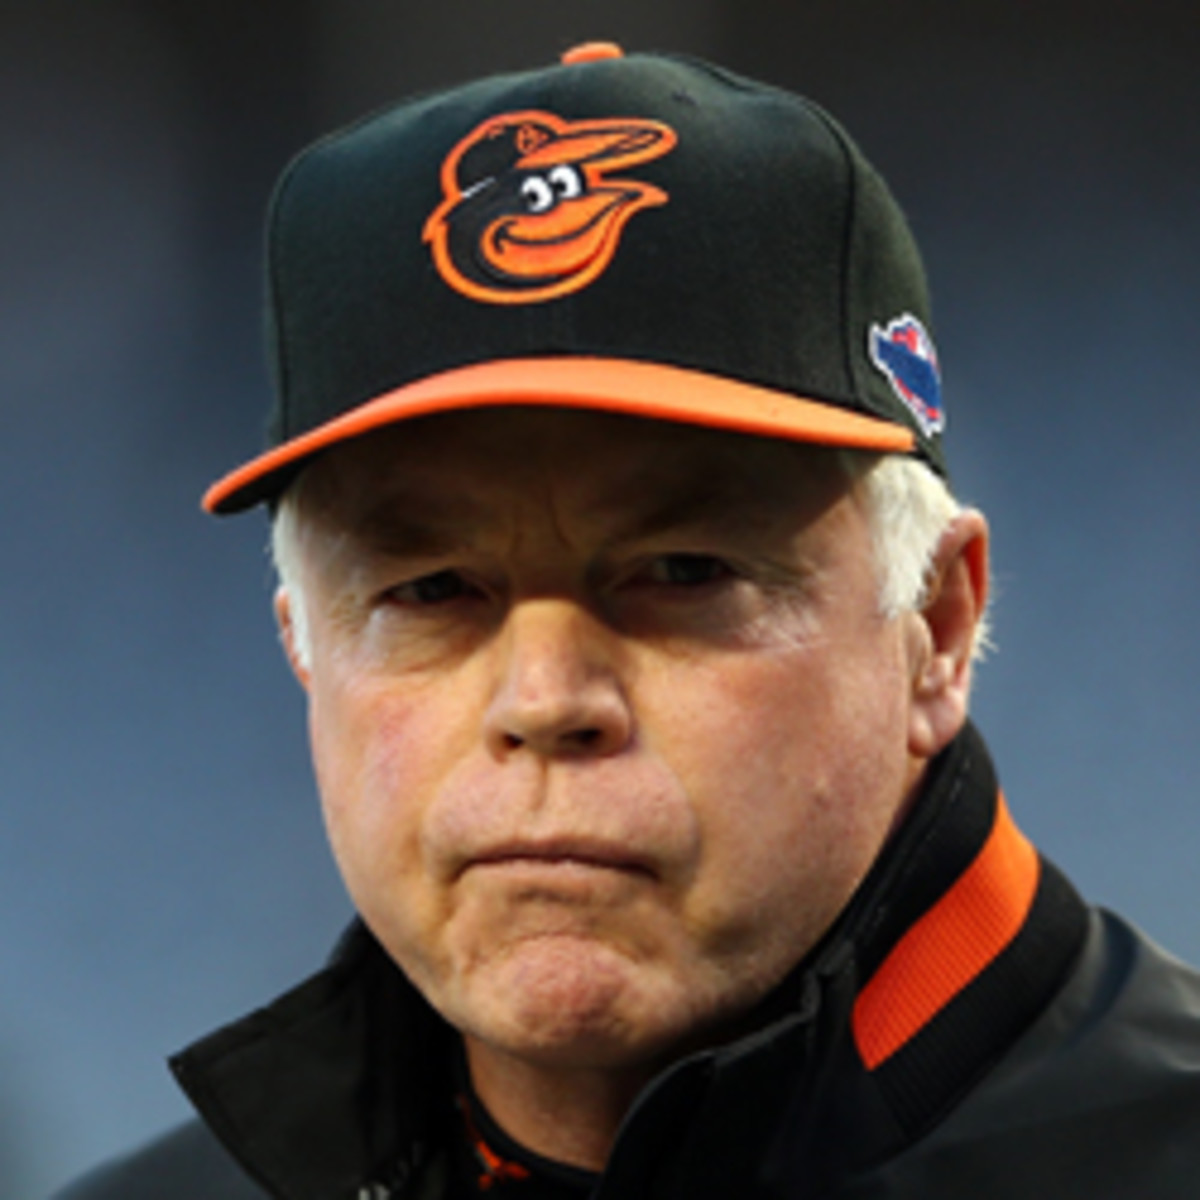 Buck Showalter managed the Orioles to the first winning season since 1997. (Elsa/Getty Images)